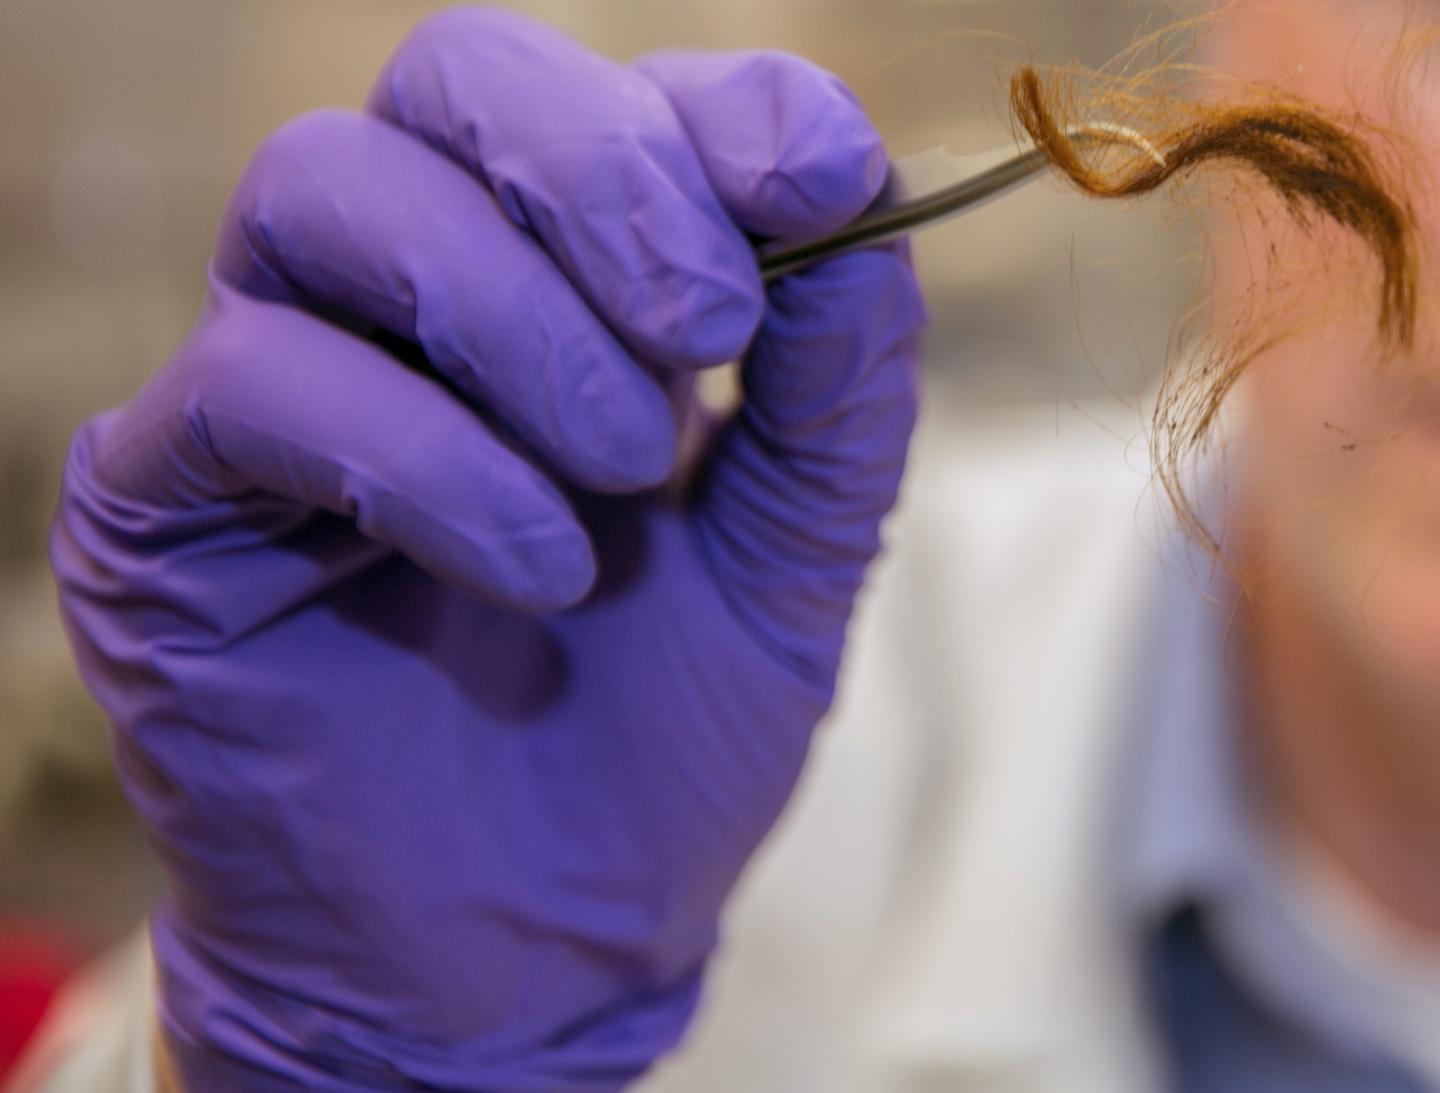 Humans May Be Uniquely Identified by the Proteins in Their Hair